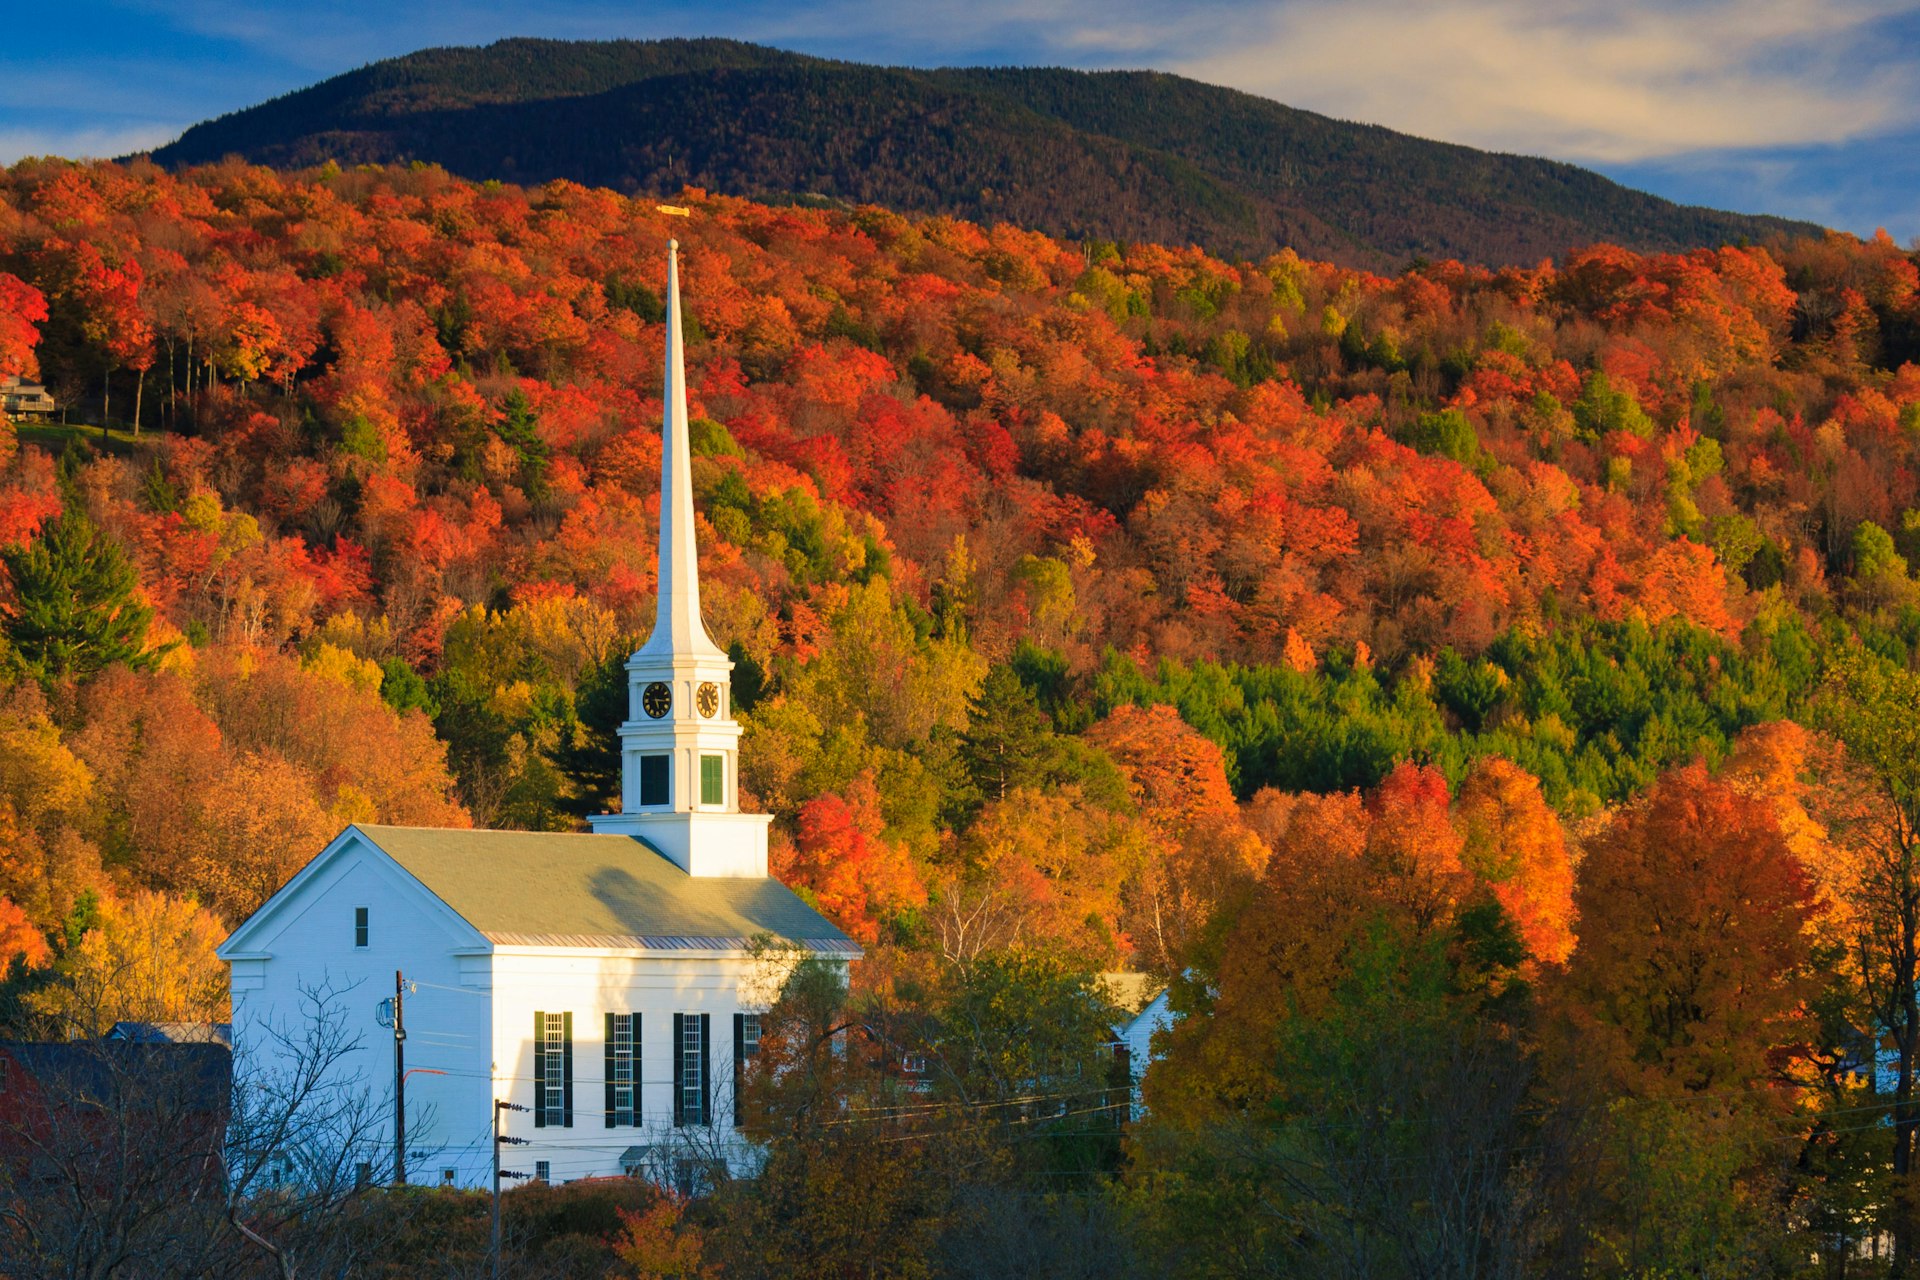 Colorful fall foliage surrounds the Stowe Community Church in Stowe, Vermont